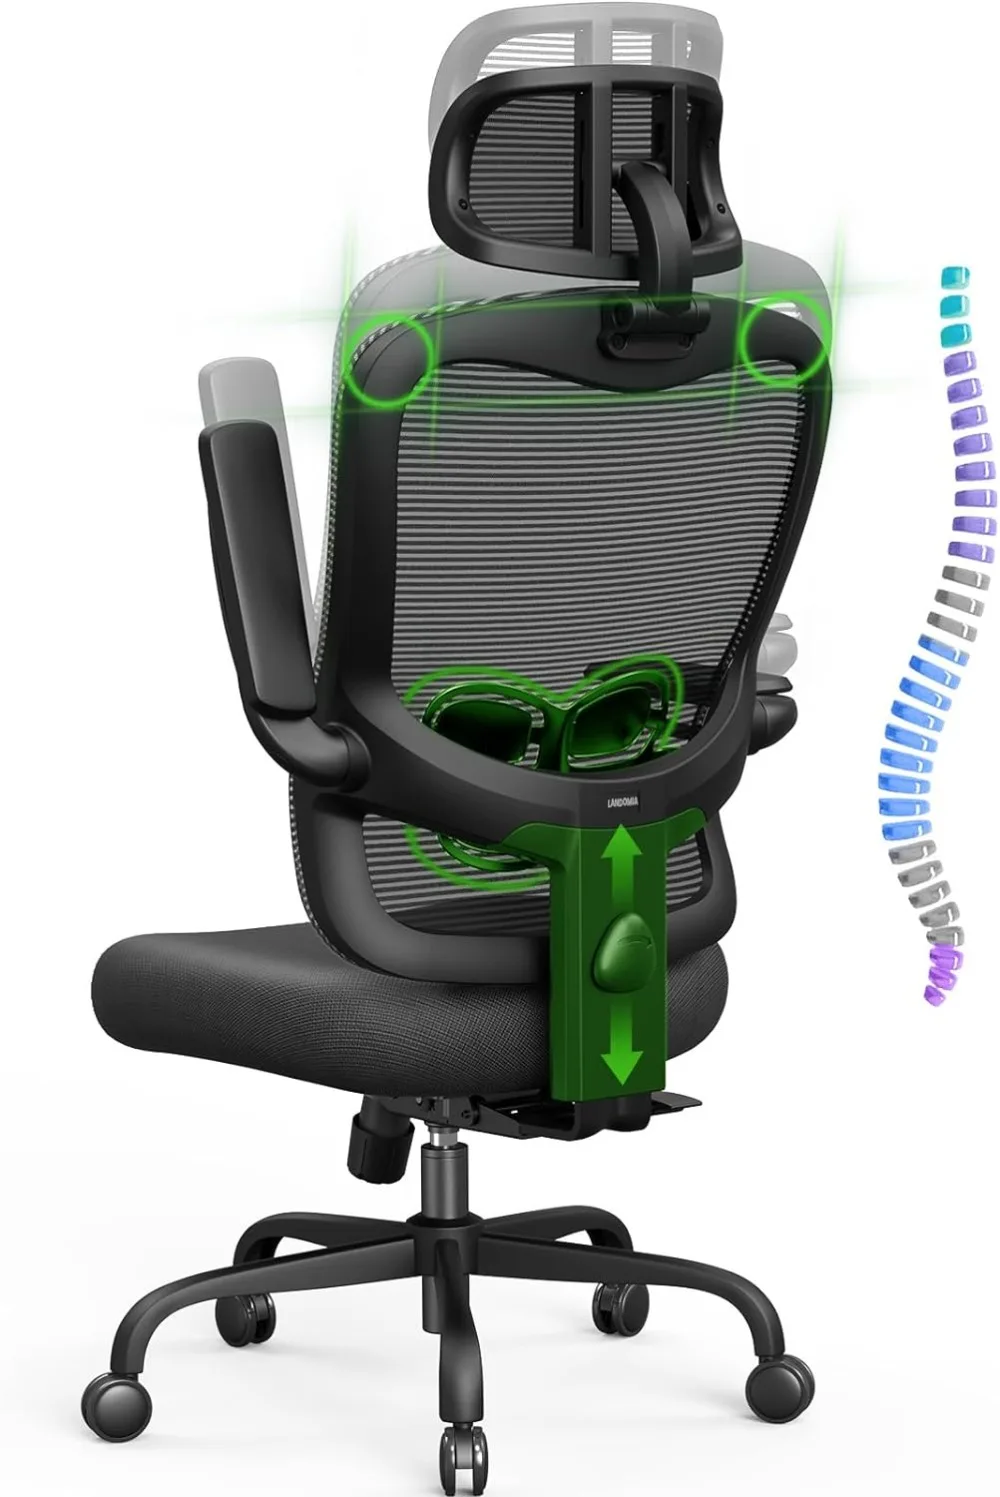 

Ergonomic Office Chair Big and Tall - 350LBS Capacity, 6'5" Tall Max, Computer Desk Chairs Over 10 Hours Comfortable